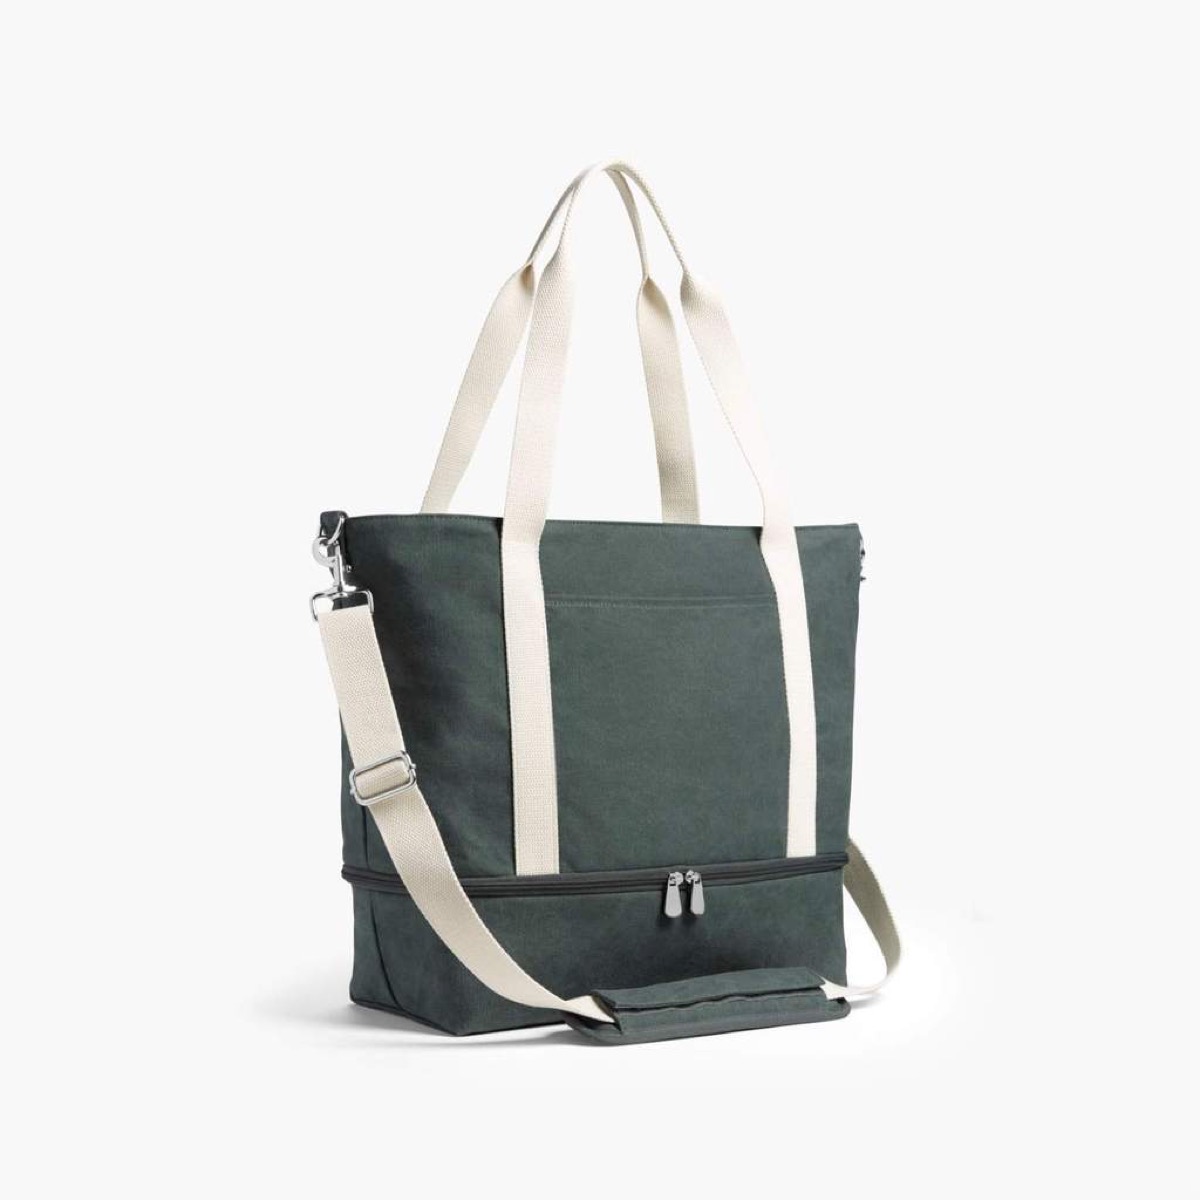 Green Catalina shoulder bag with white straps